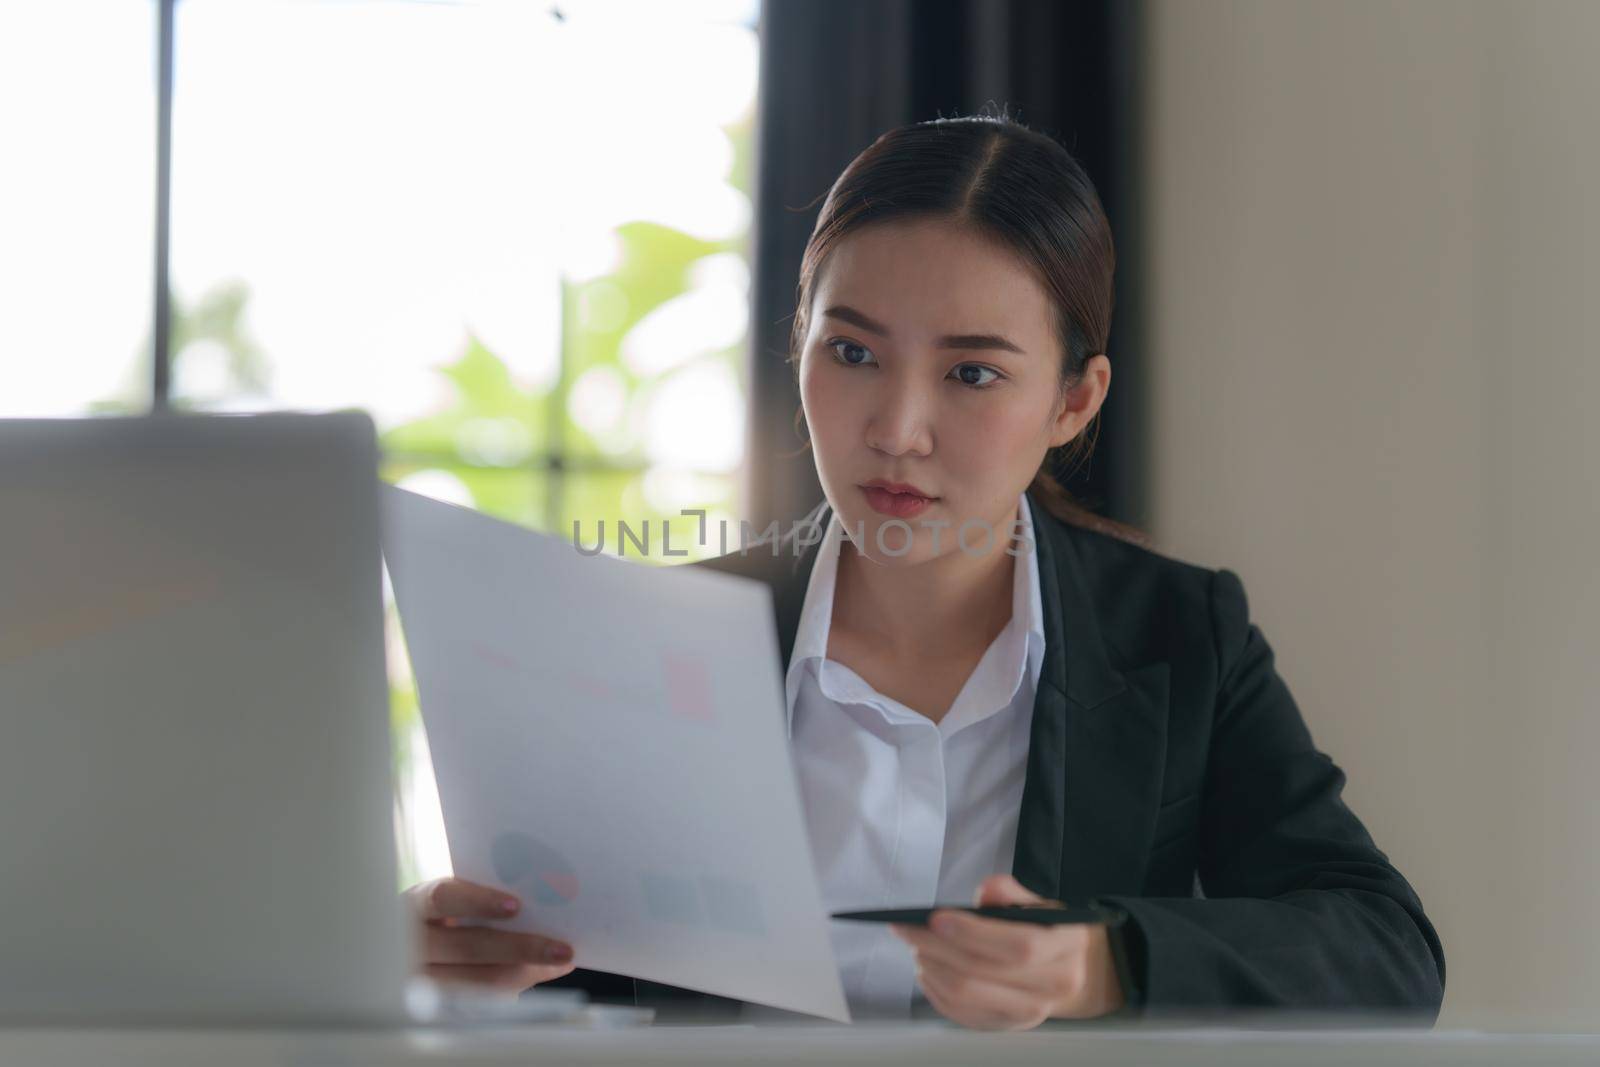 Fund investment concept. Stressed Business woman using finance application.